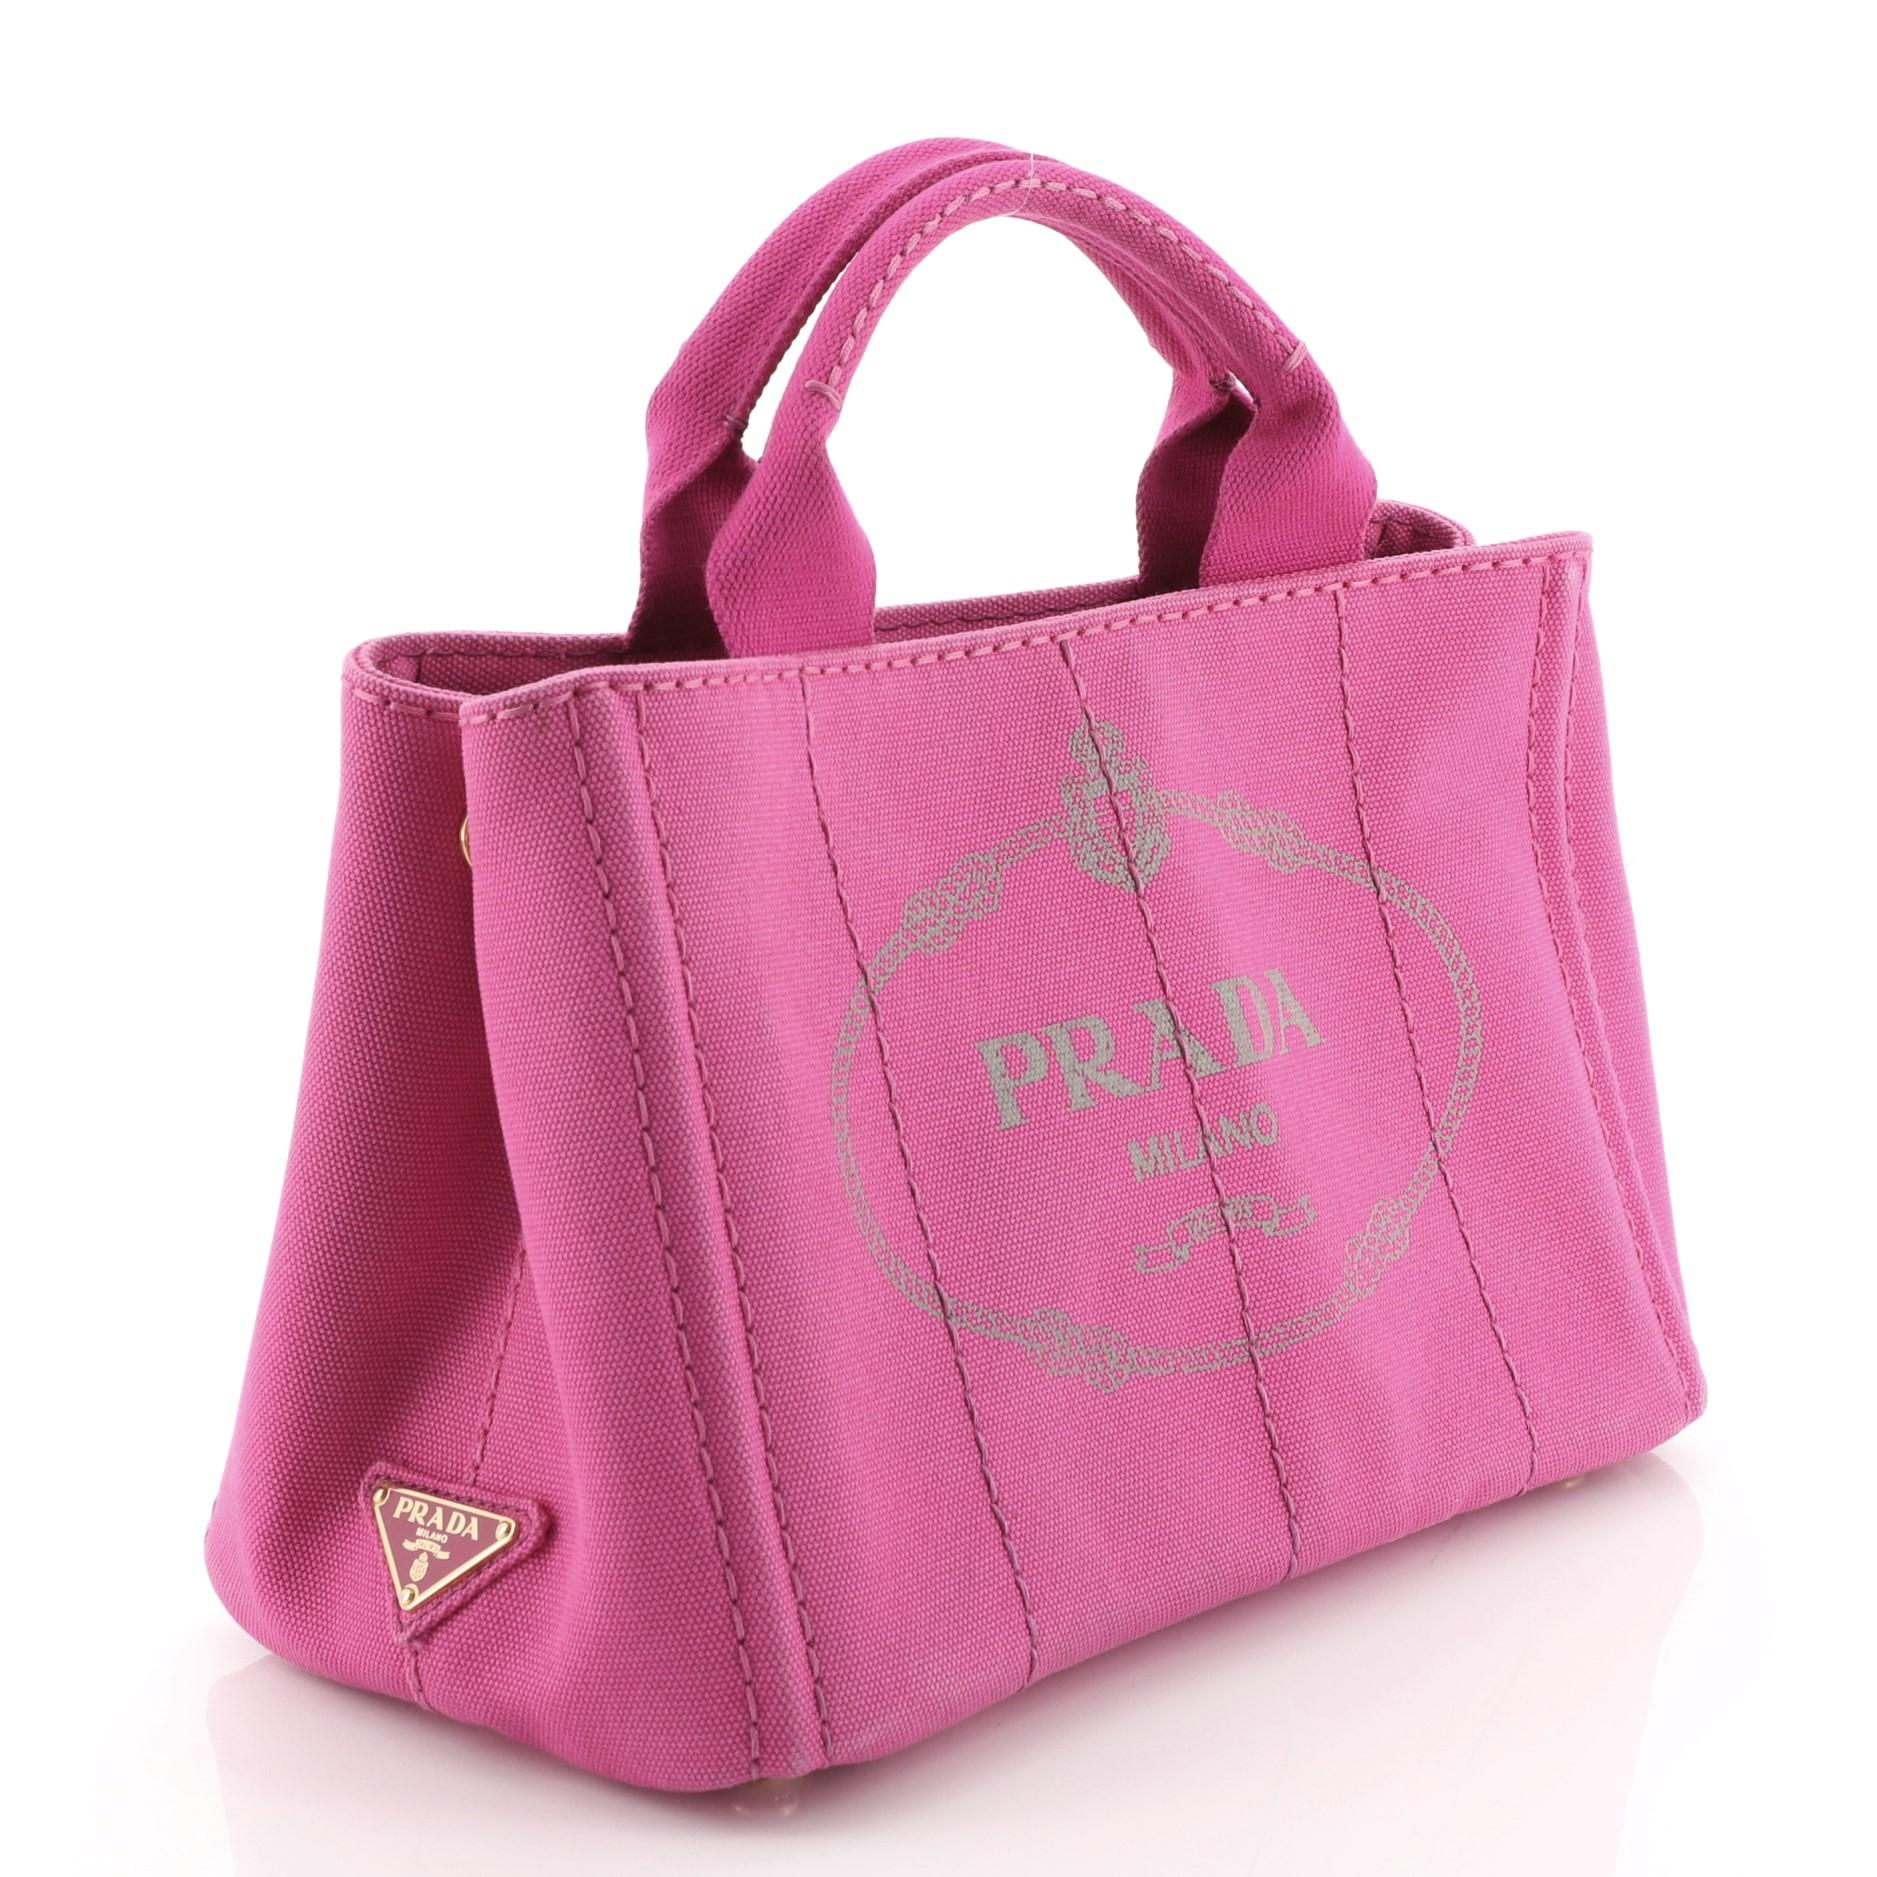 This Prada Canapa Convertible Tote Canvas Mini is a perfect everyday bag fit for the modern woman. Crafted from pink canvas, features dual rolled handles, side snap buttons, and gold-tone hardware. It opens to a pink canvas interior with zip and